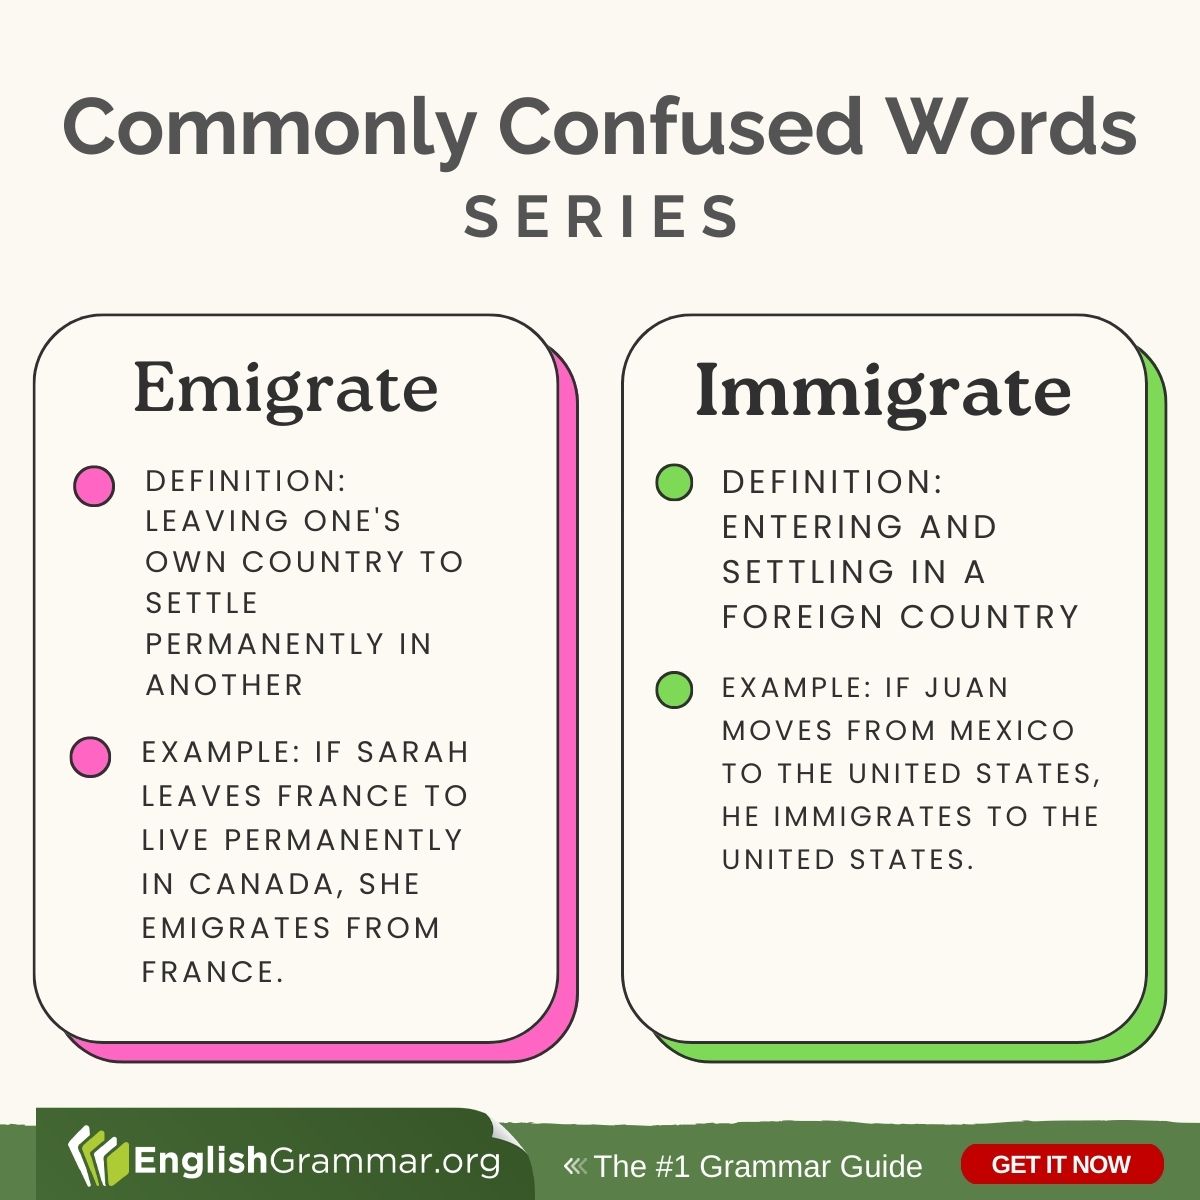 Emigrate vs. Immigrate #vocabulary #amwriting #writing